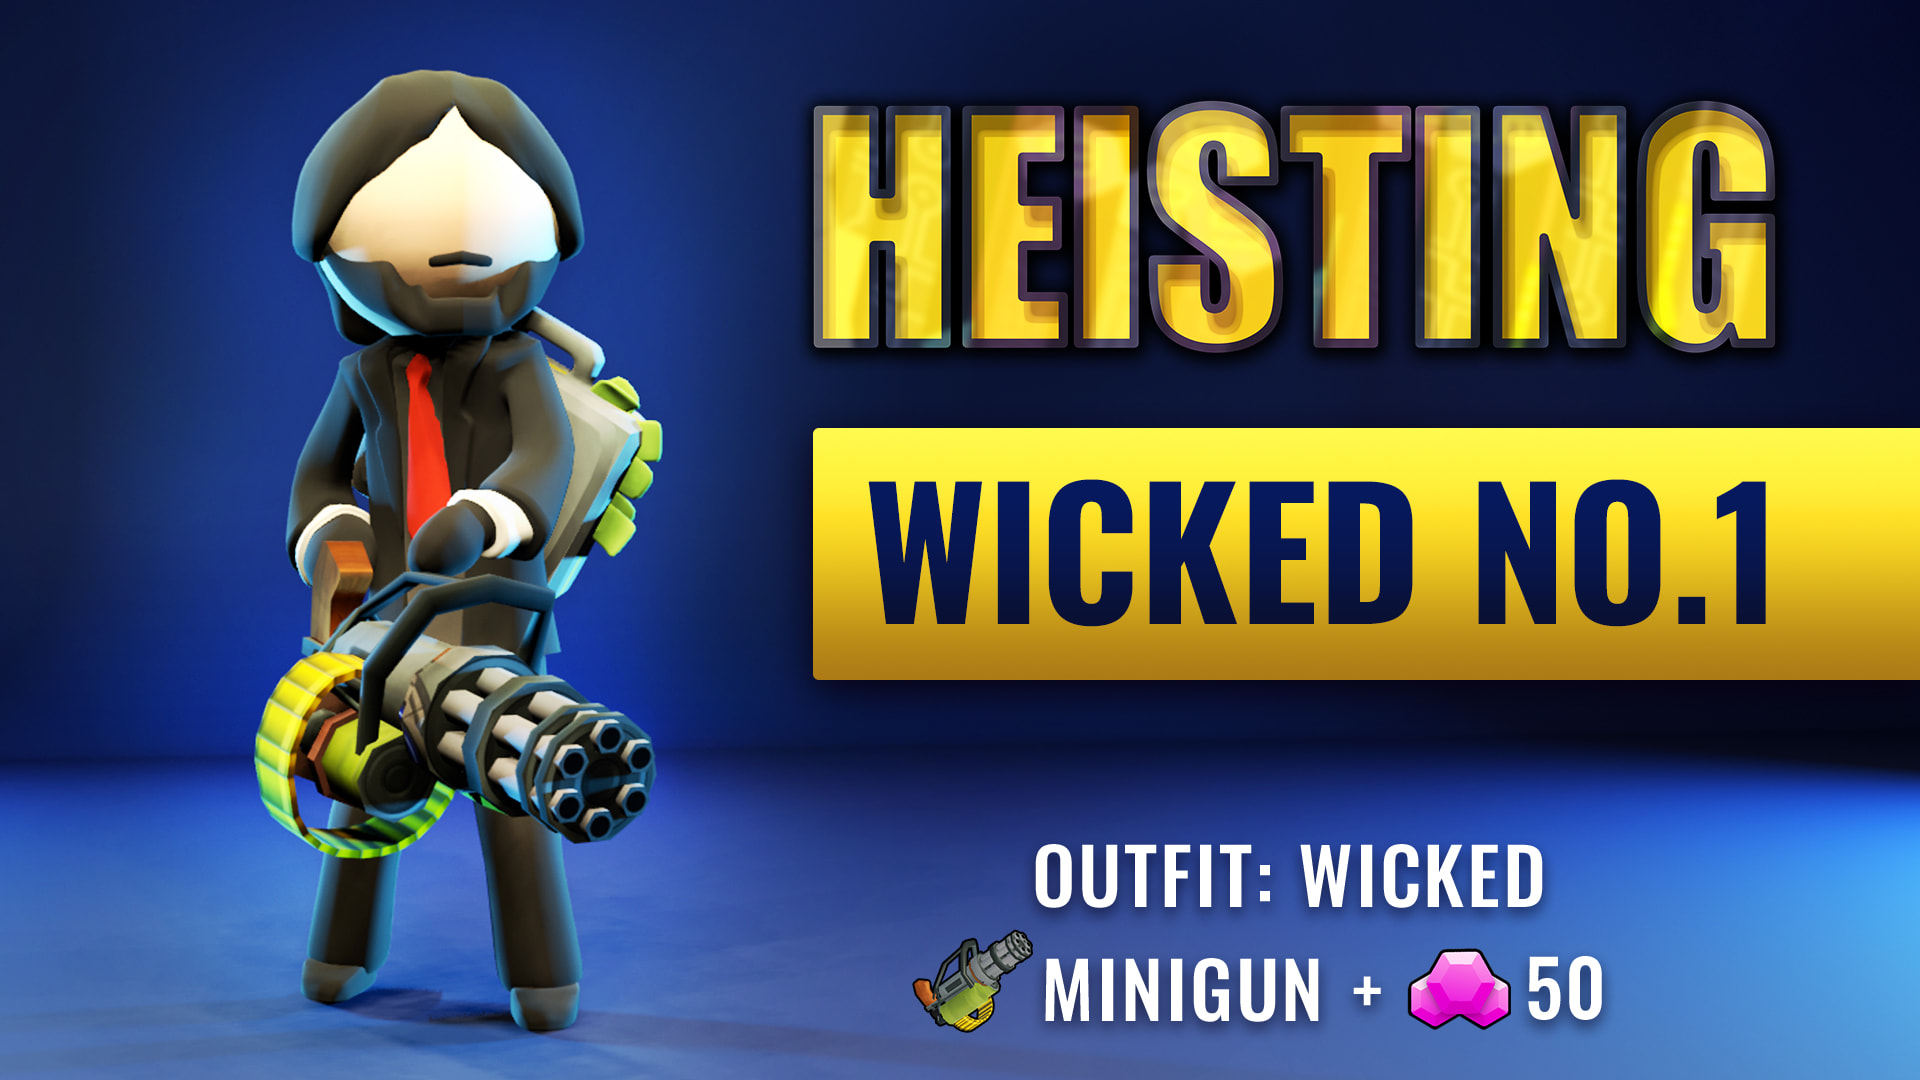 Heisting: Wicked No. 1